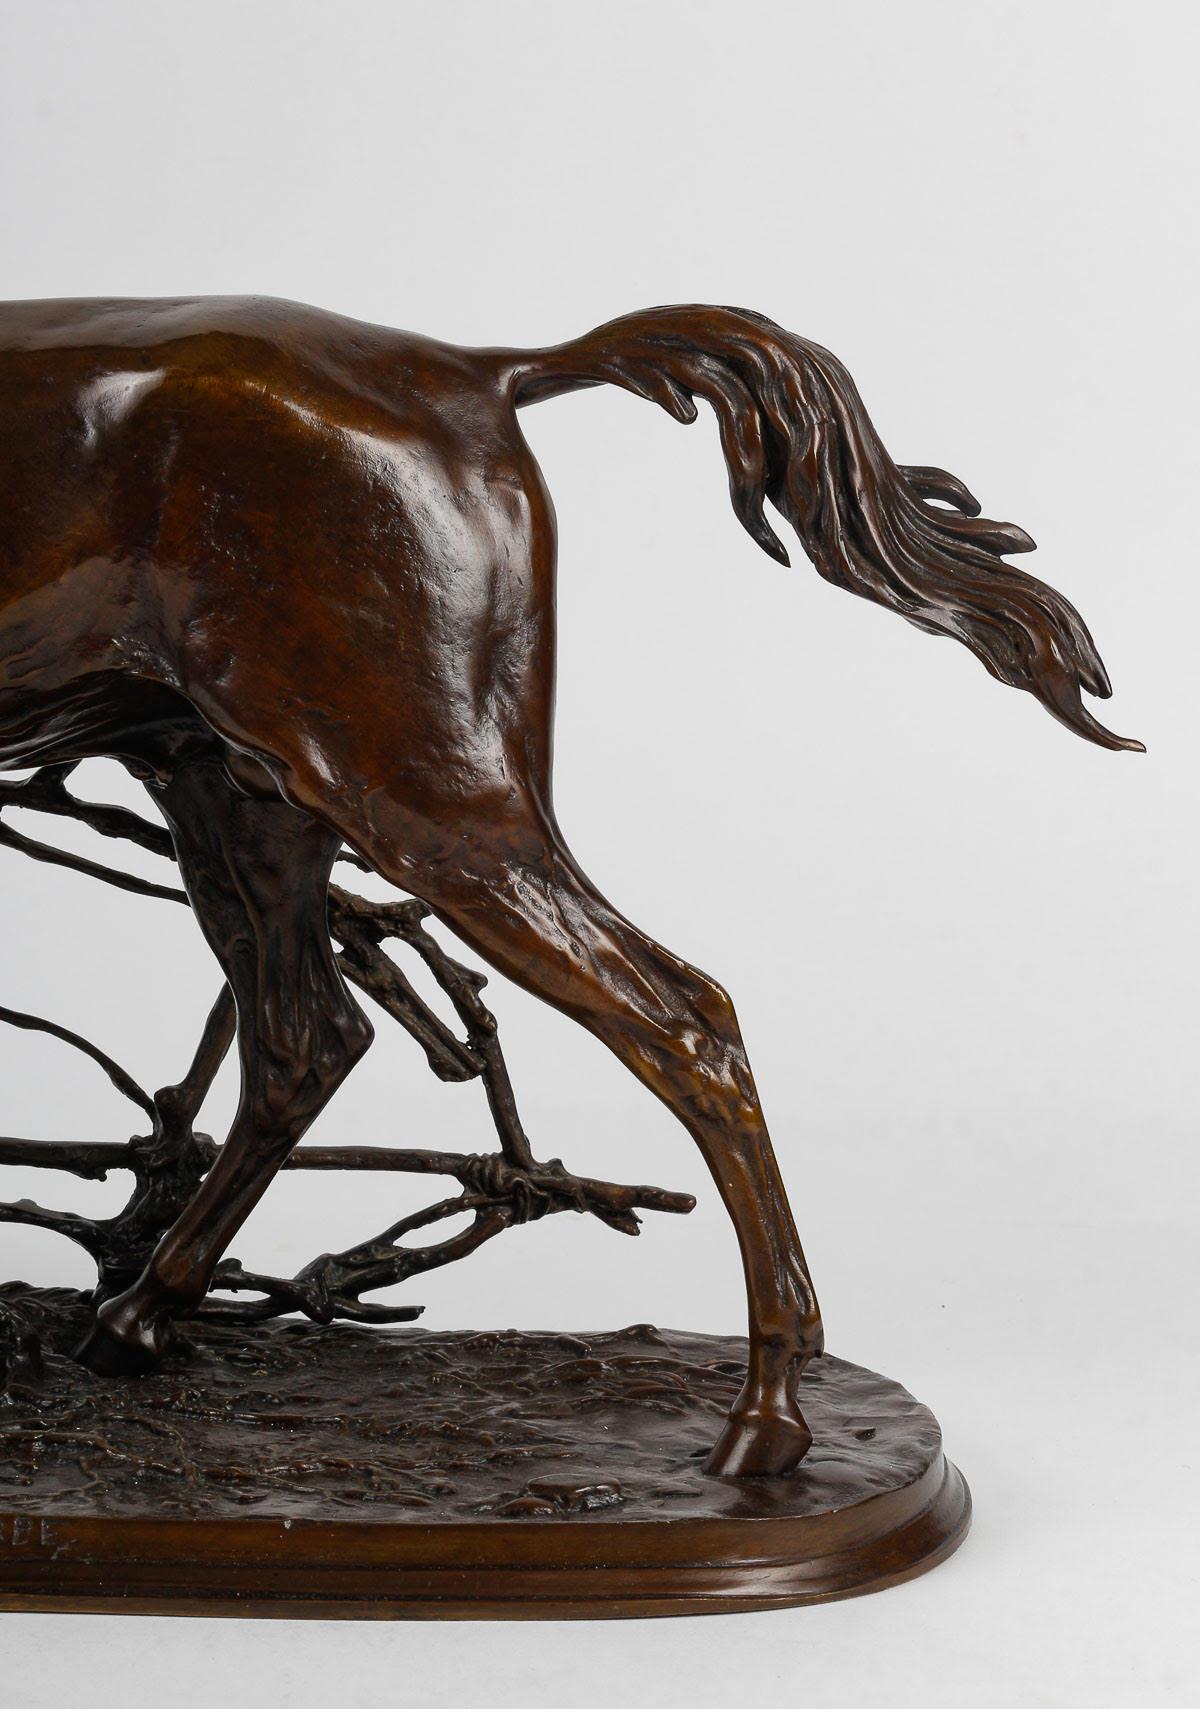 Mid-Century Modern Bronze Sculpture of a Horse in its Enclosure, 20th Century.